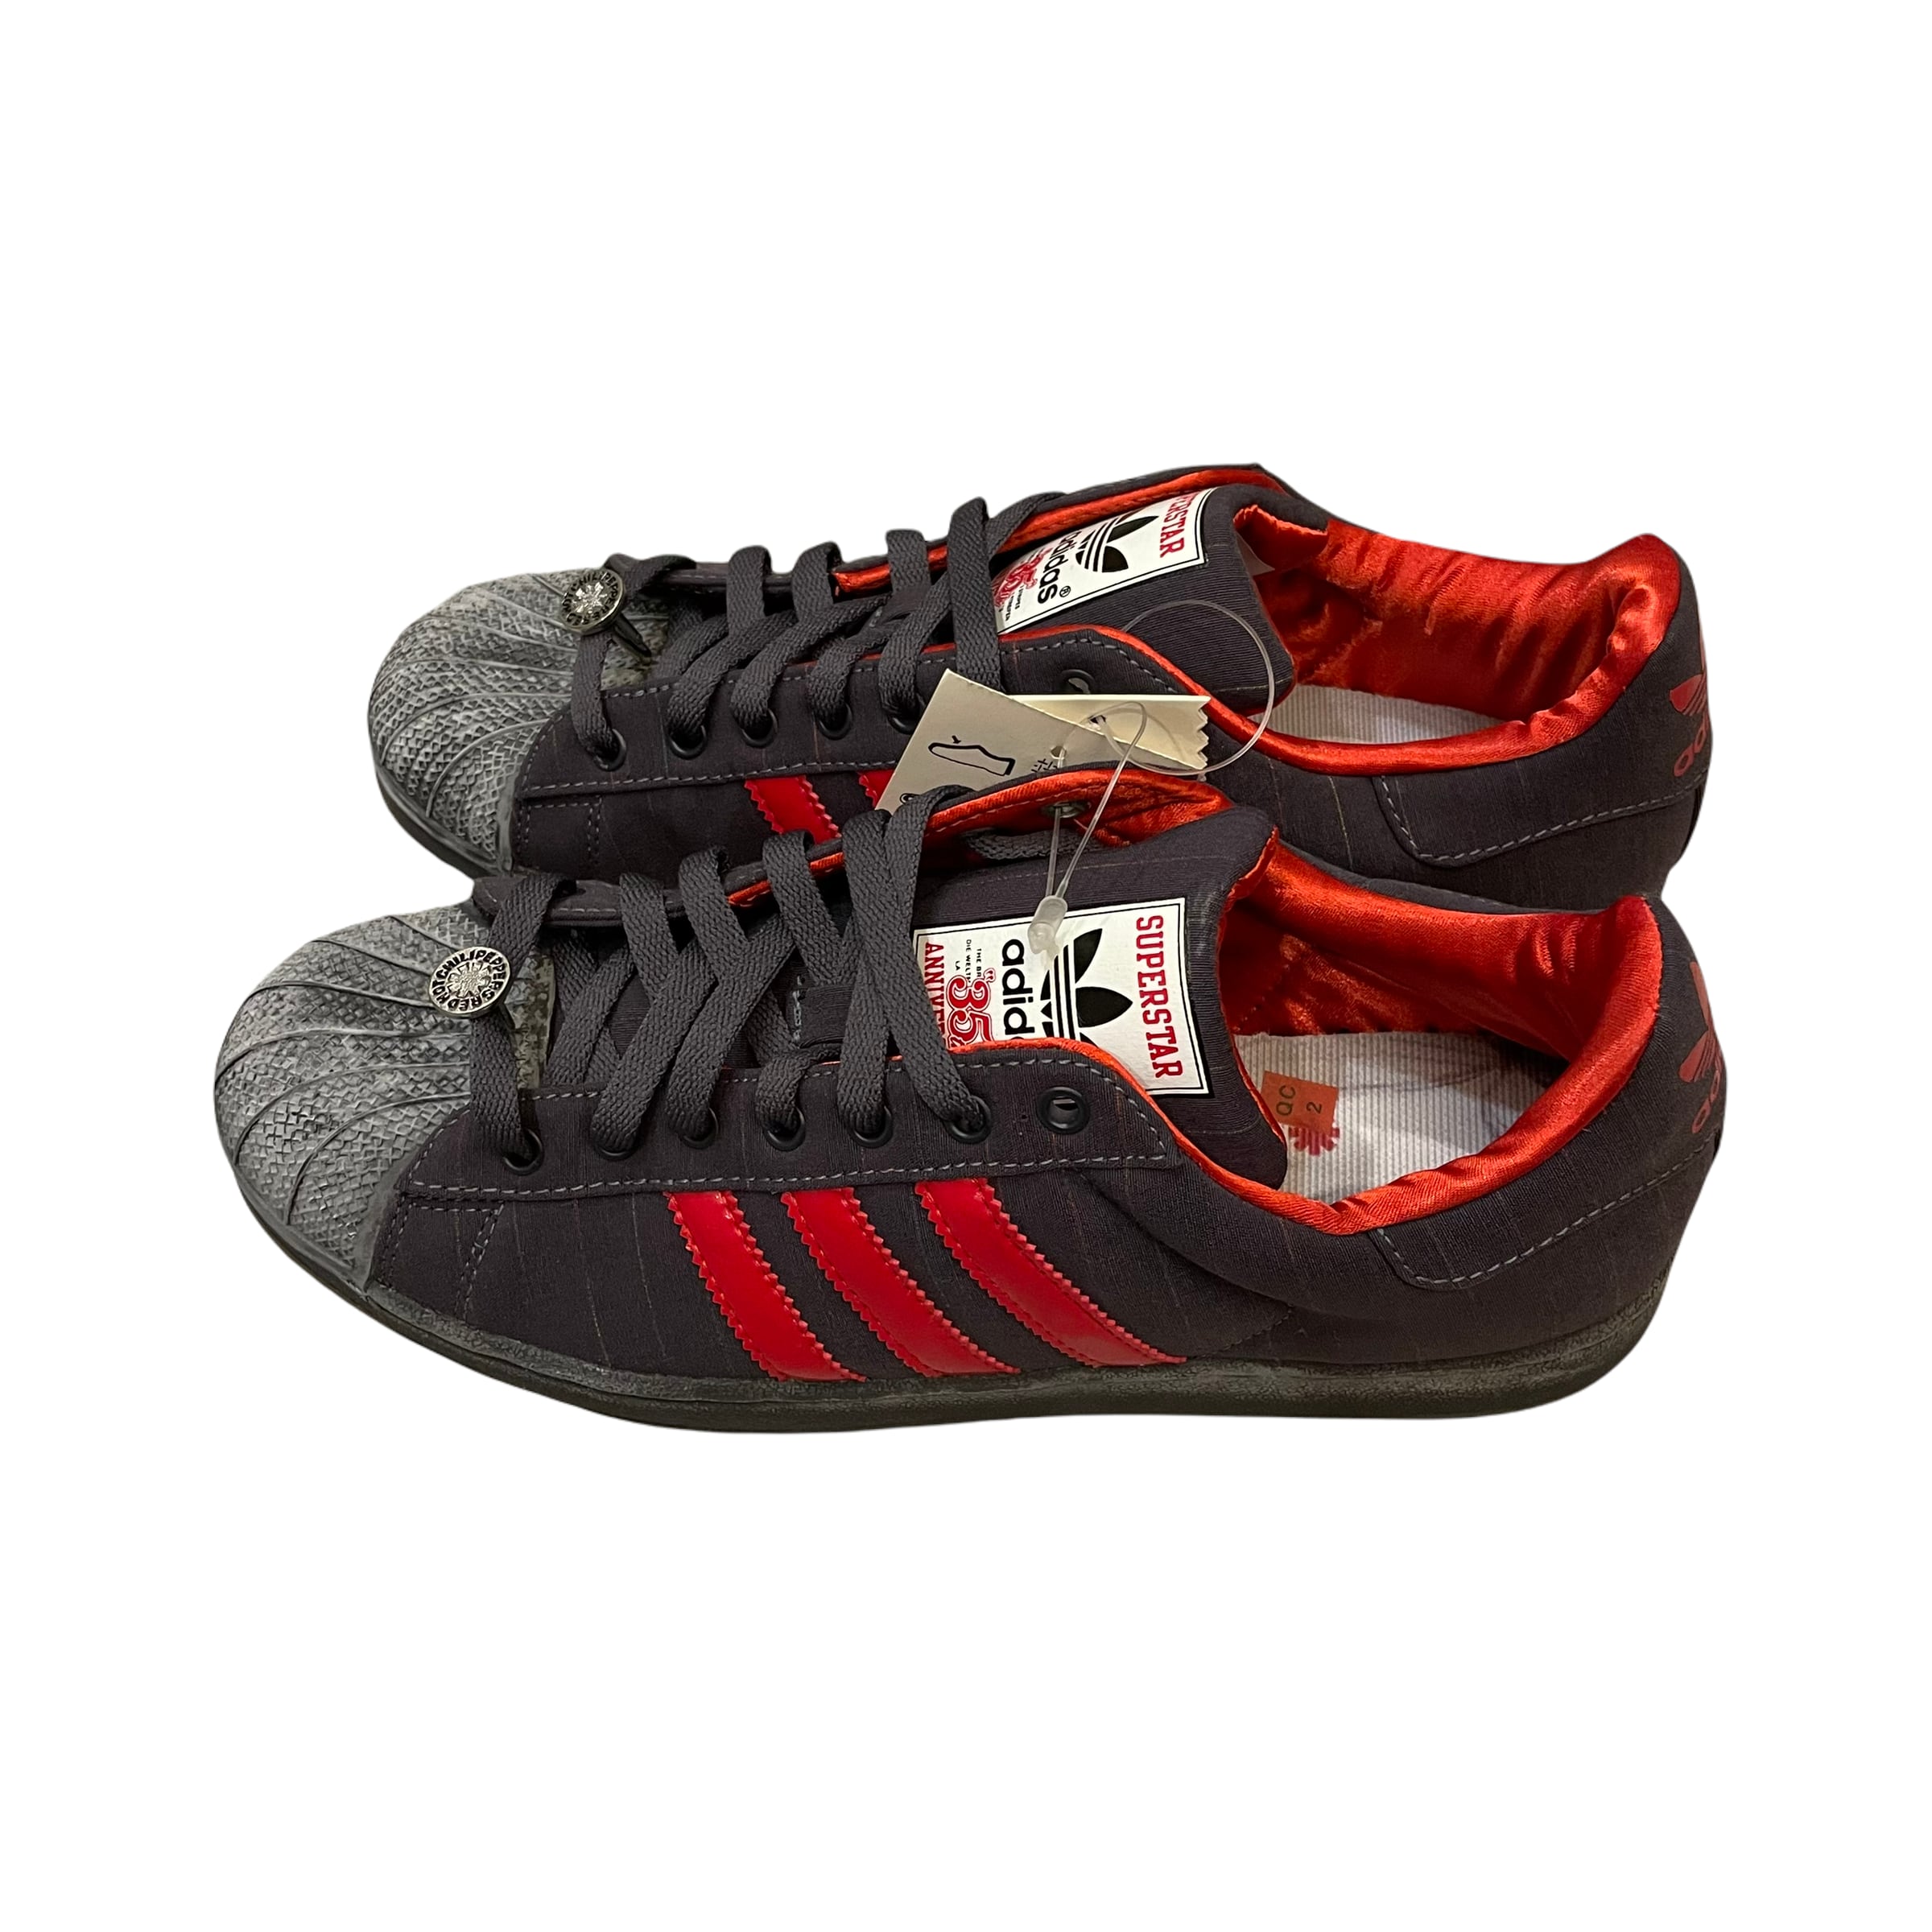 adidas superstar 35th anniversary × RED HOT CHILI PEPPERS | THE SHOP URL